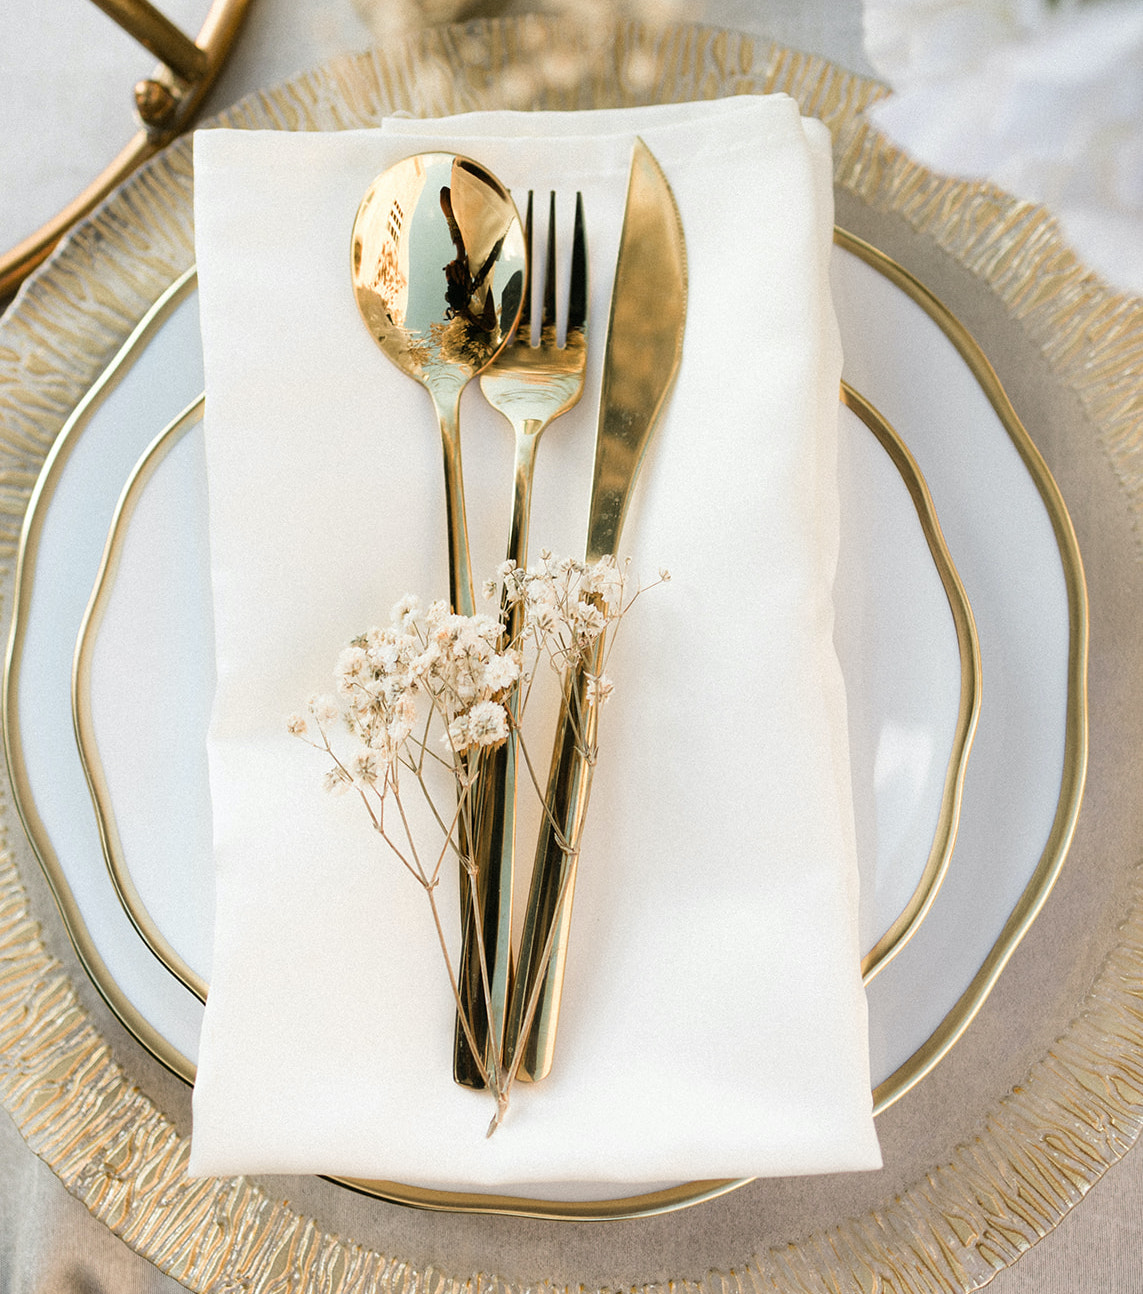 An up-close photo of the gold dinnerware used for the ethereal rooftop wedding styled shoot.